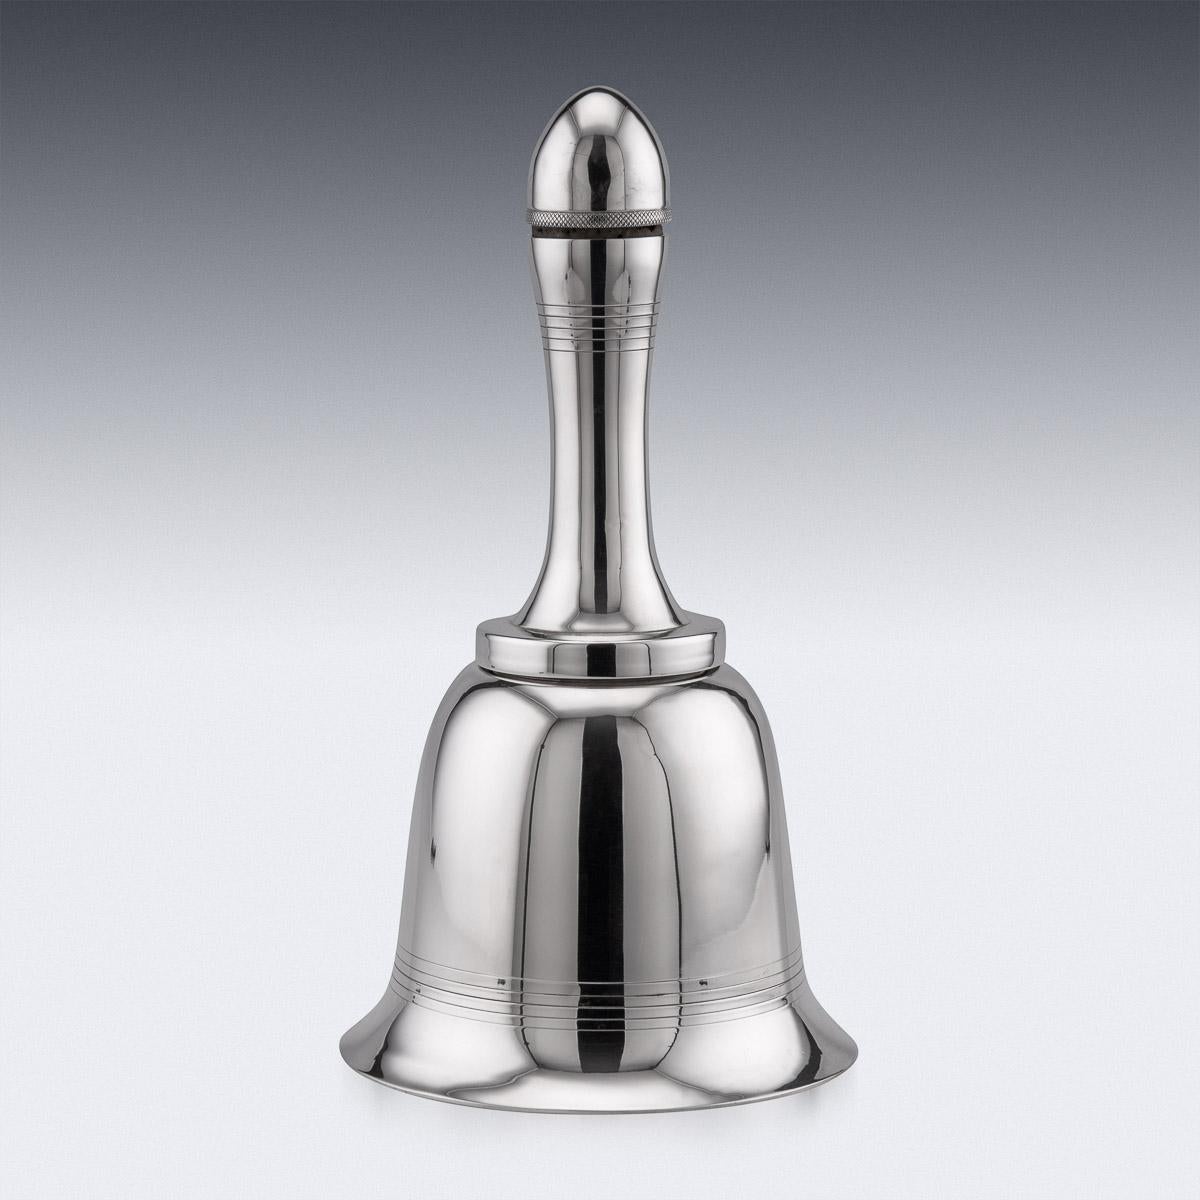 A silver plated bell-form cocktail shaker, stamped below A&C, ASPREY LONDON, Made in England, patent. It is easy to imagine the appeal behind these objects which would have made wonderful items to wow their guests.

Condition
In Great Condition -